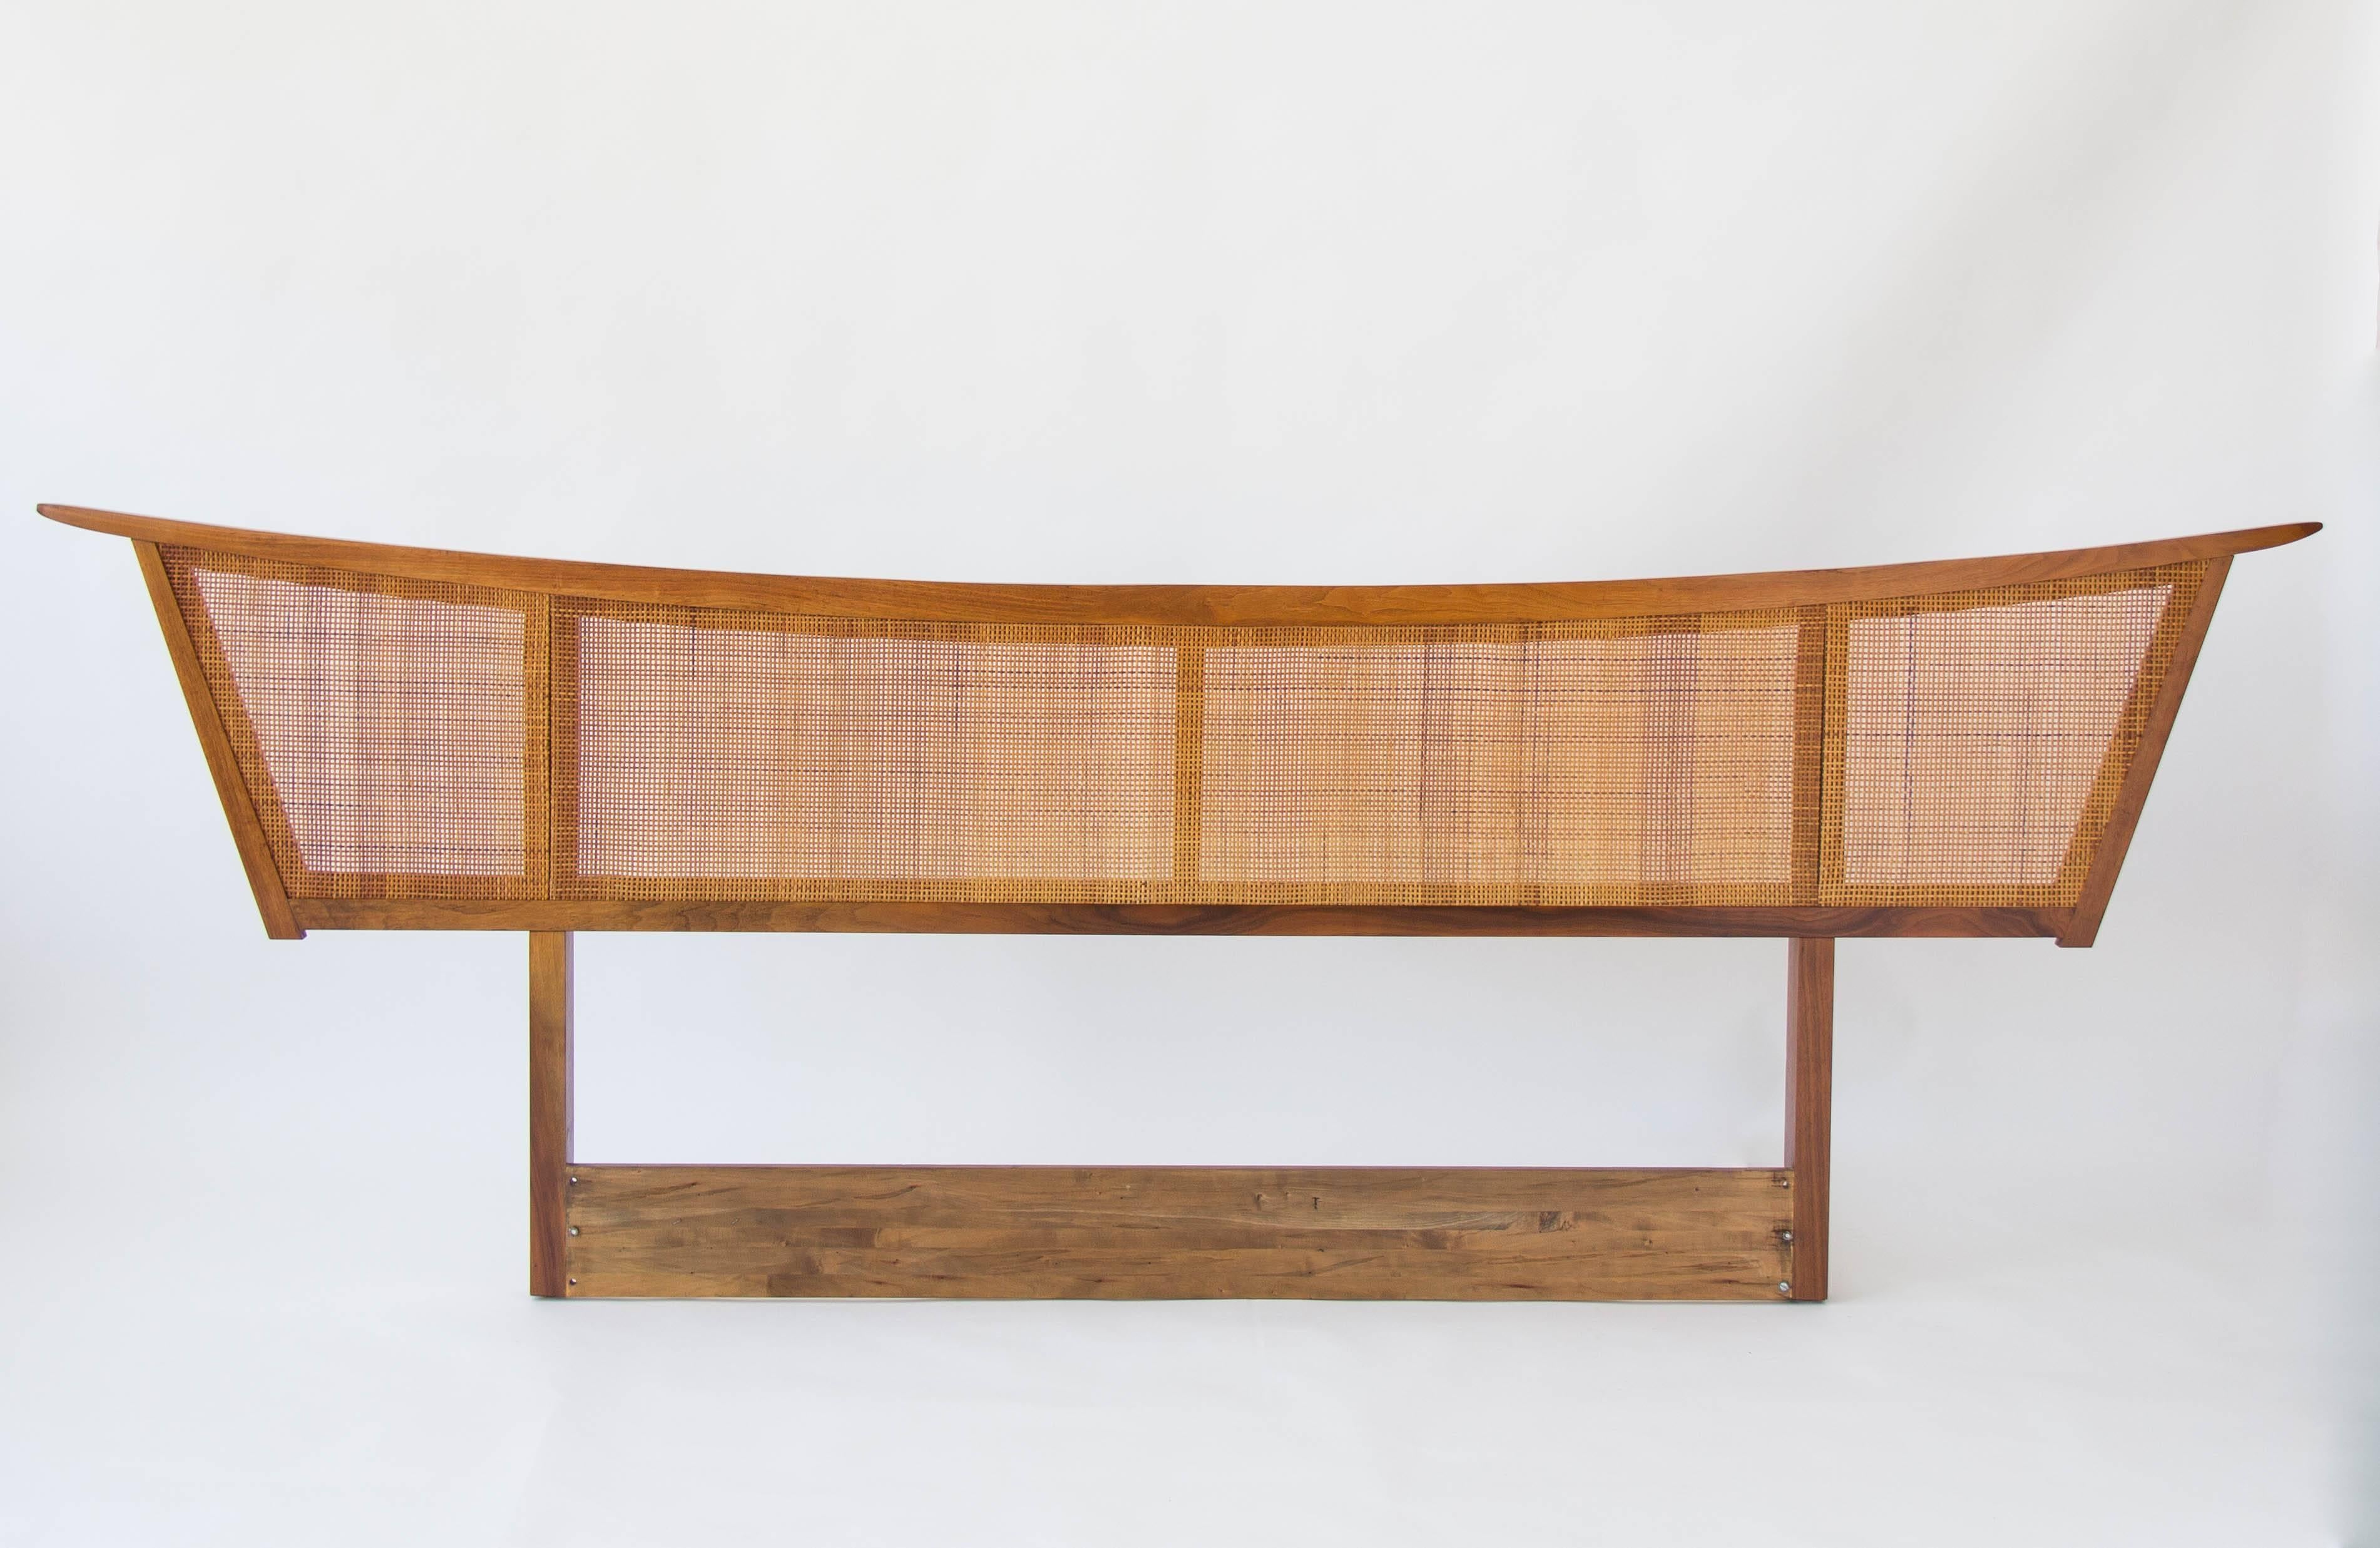 A walnut and cane headboard by George Nakashima for Widdicombe Furniture. From the "Origins" line, this Shaker-inspired piece has an exaggerated frame with a bowed top edge. The original woven cane panel fills the frame and contrasts with